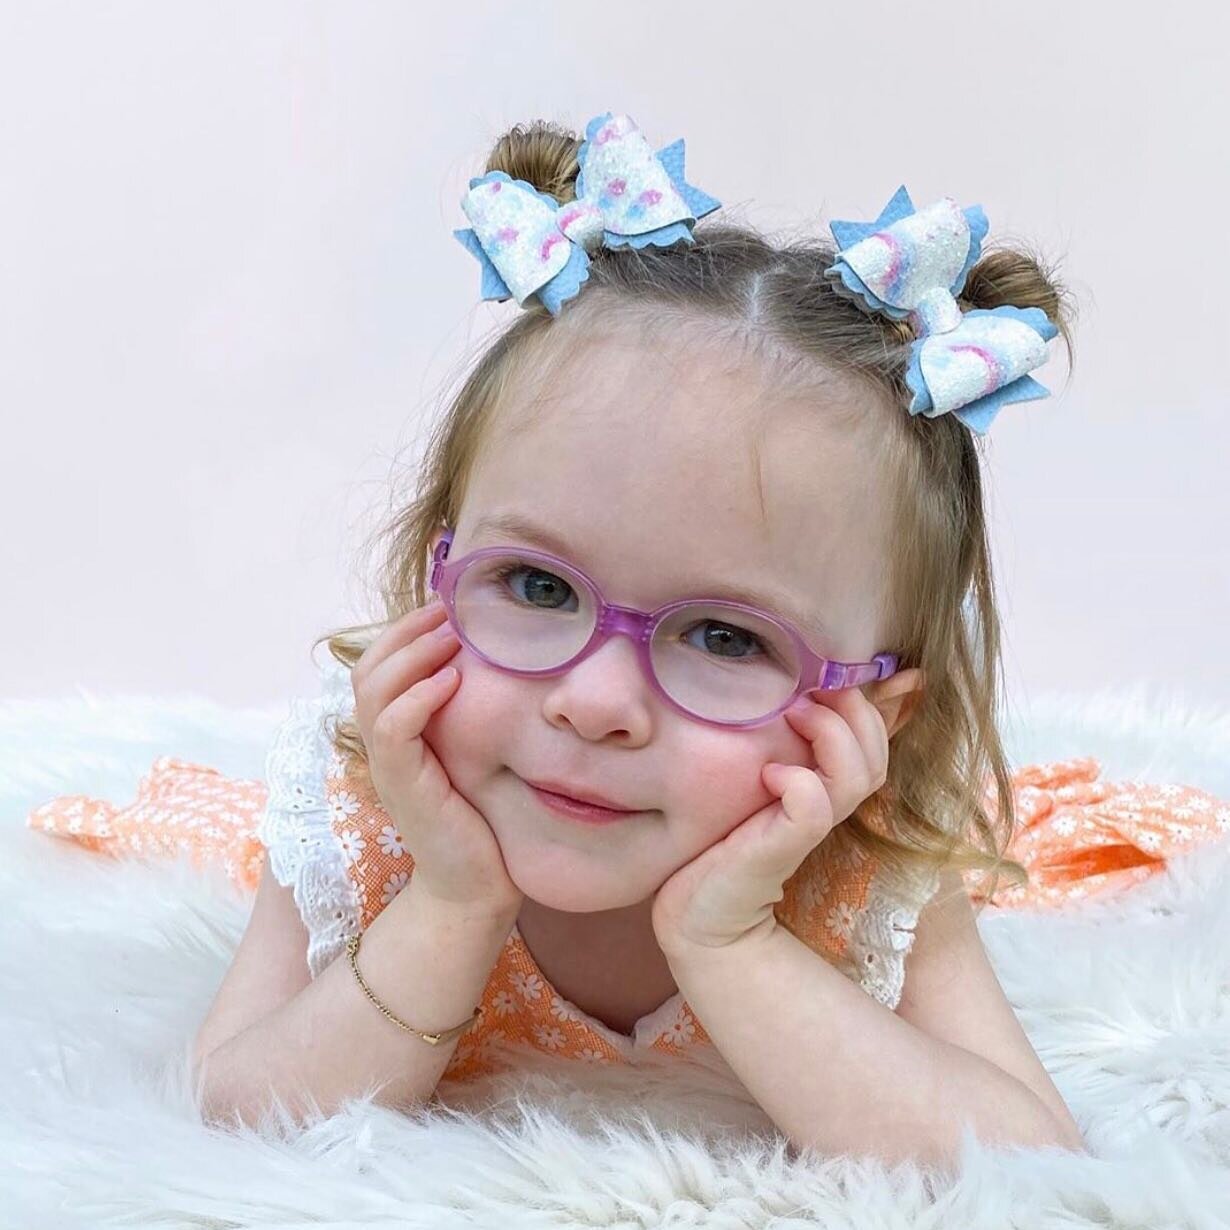 Friday Feels in cute glasses!! How gorgeous does Hazel look in our TKAC28 model 🤓 Purple frames with love hearts, what a perfect pair 😍 
-
Kids glasses can&rsquo;t just be any ordinary pair of glasses from just anywhere! They need to be suitable AN